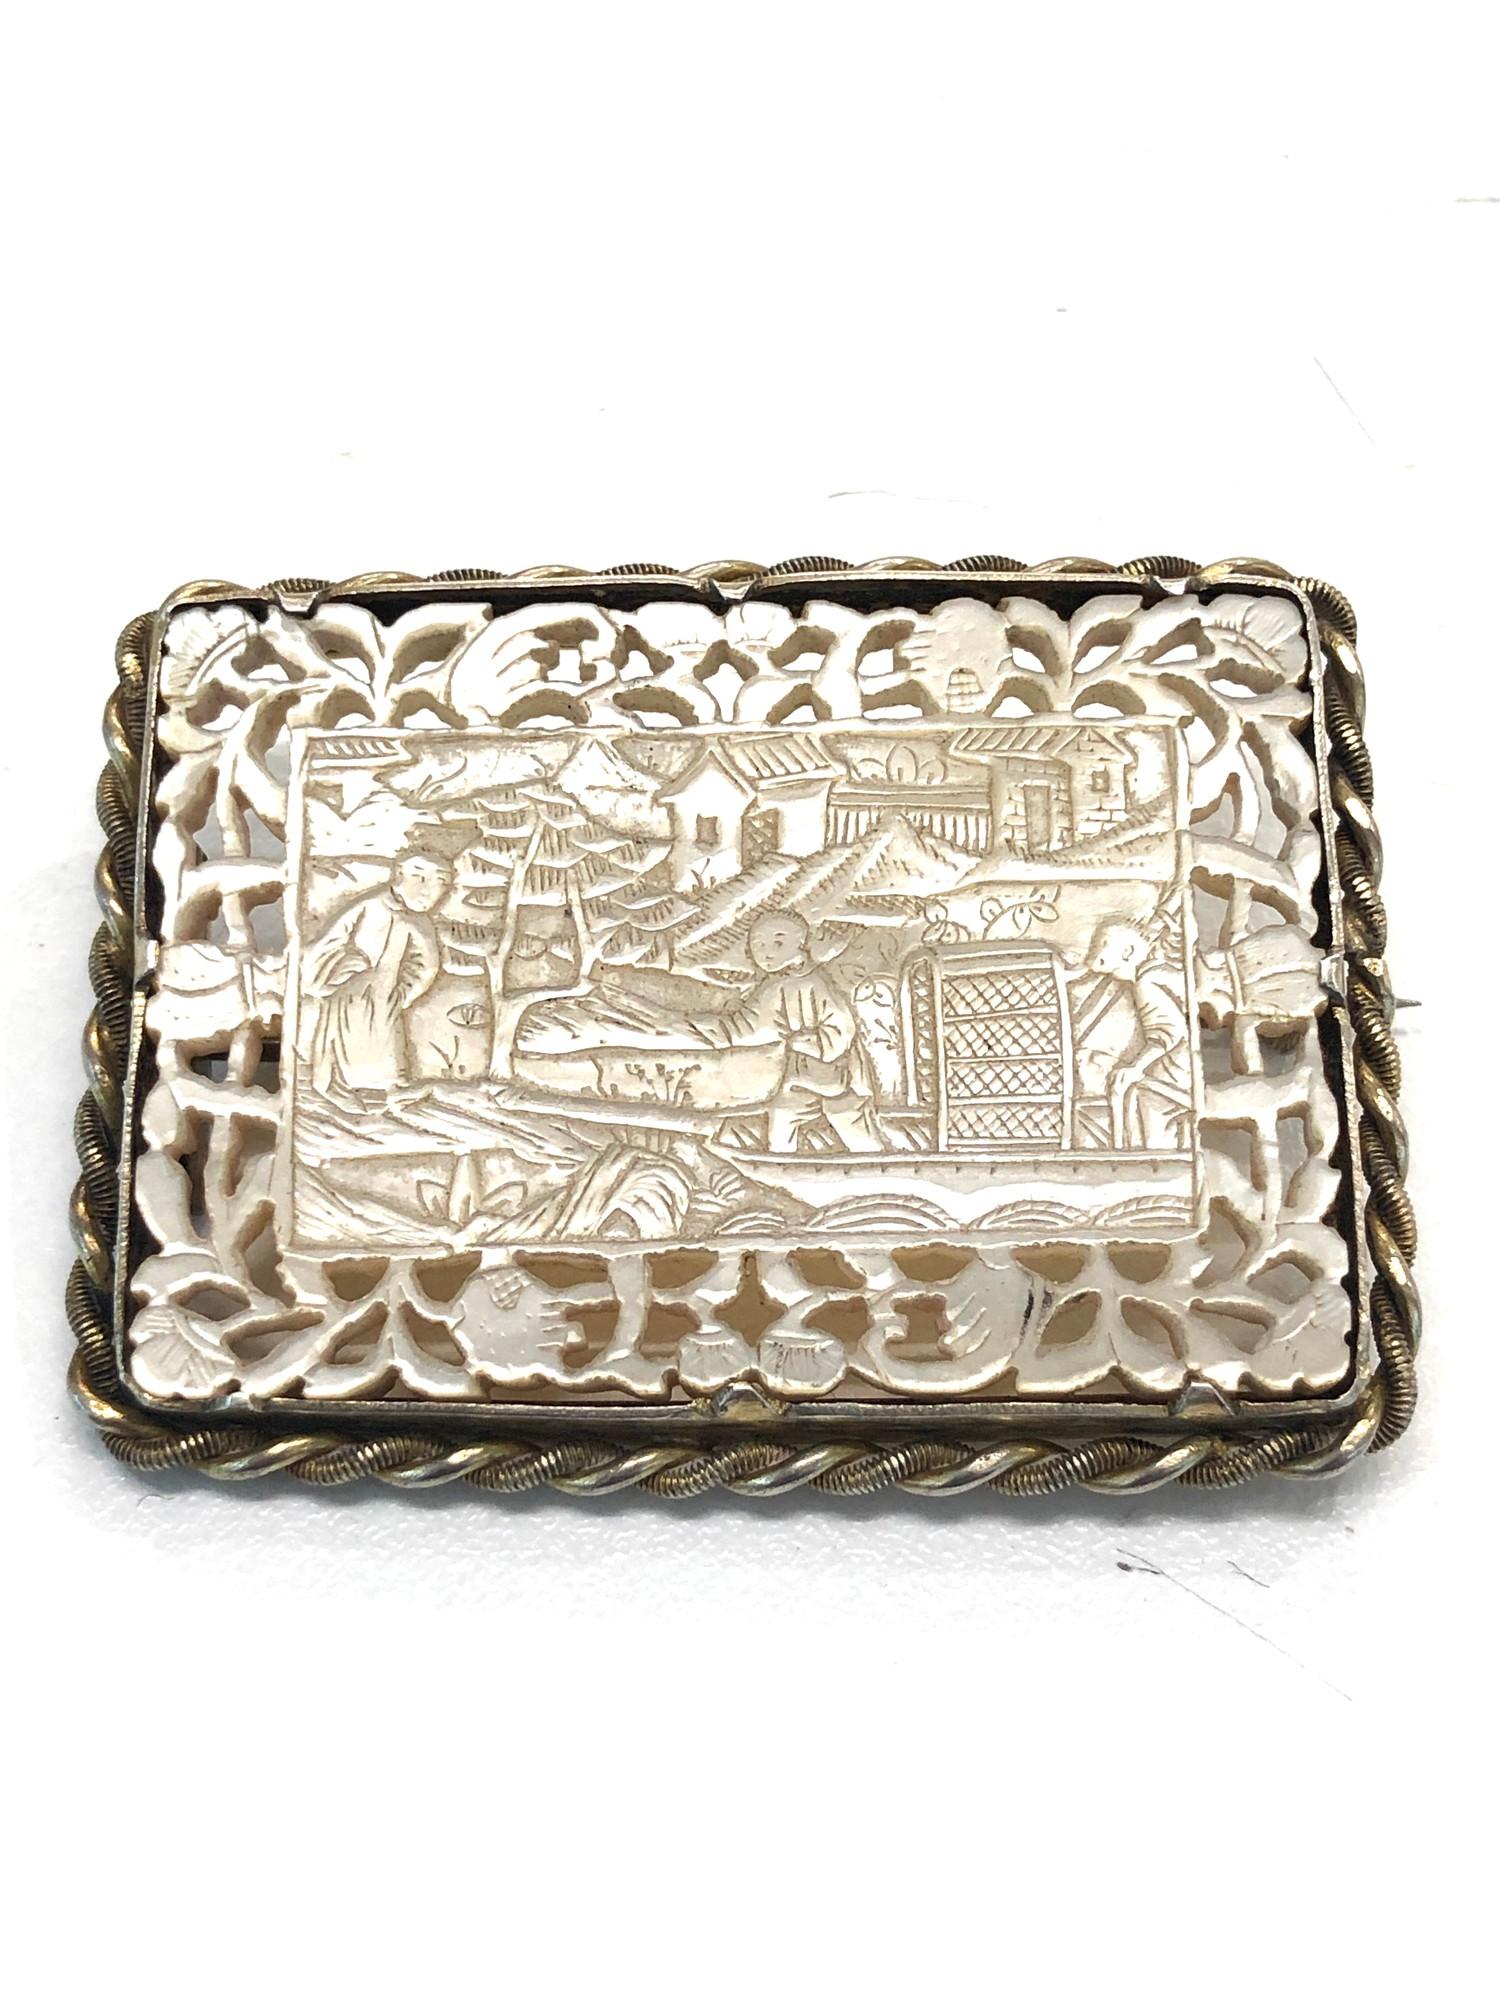 Georgian mother of pearl Chinese gaming token brooch, overall good condition - Image 3 of 5